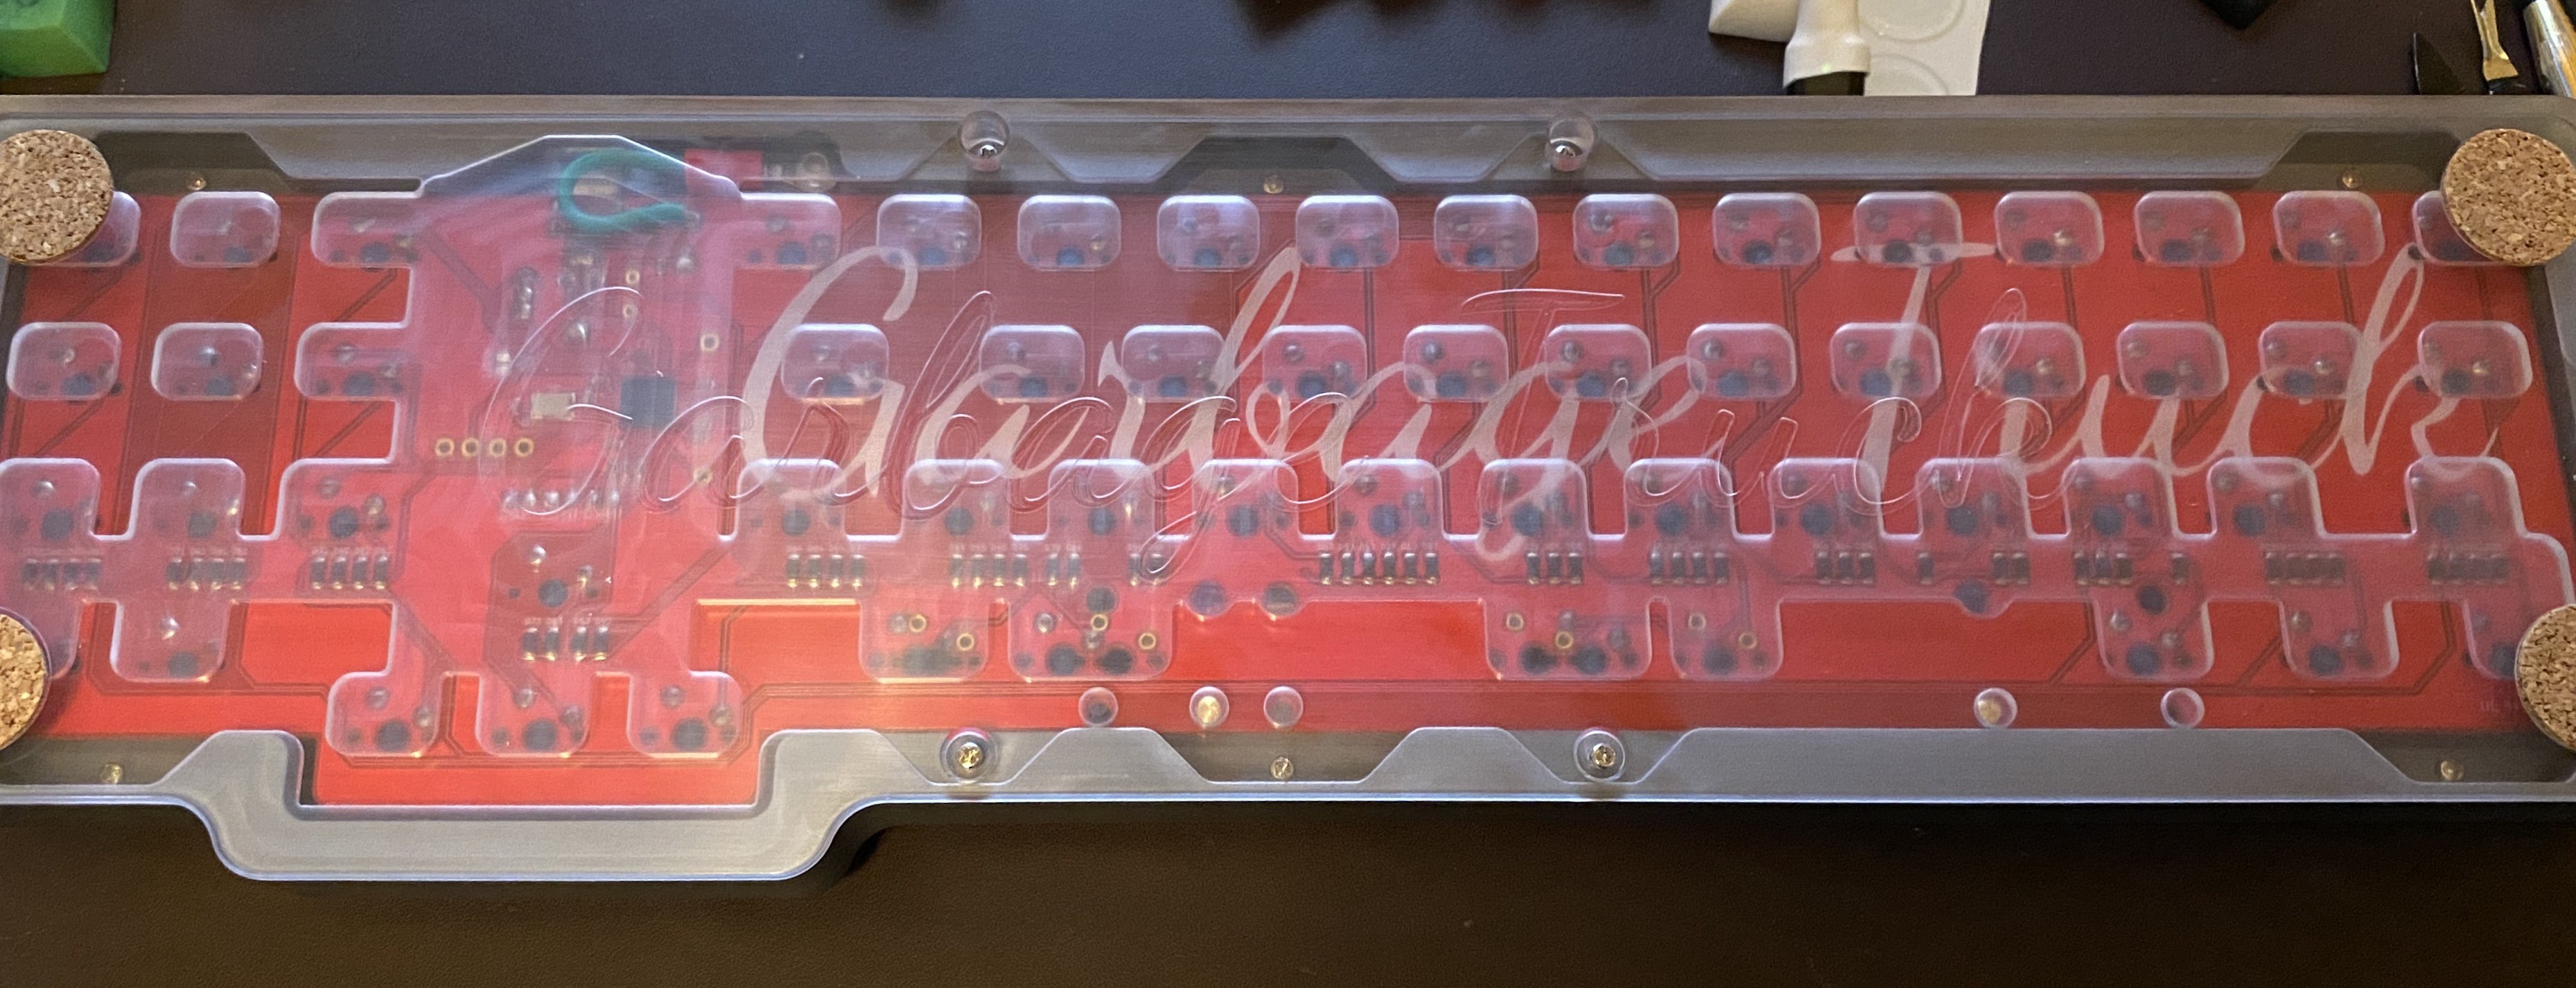 Details of the prototype milled acrylic case bottom